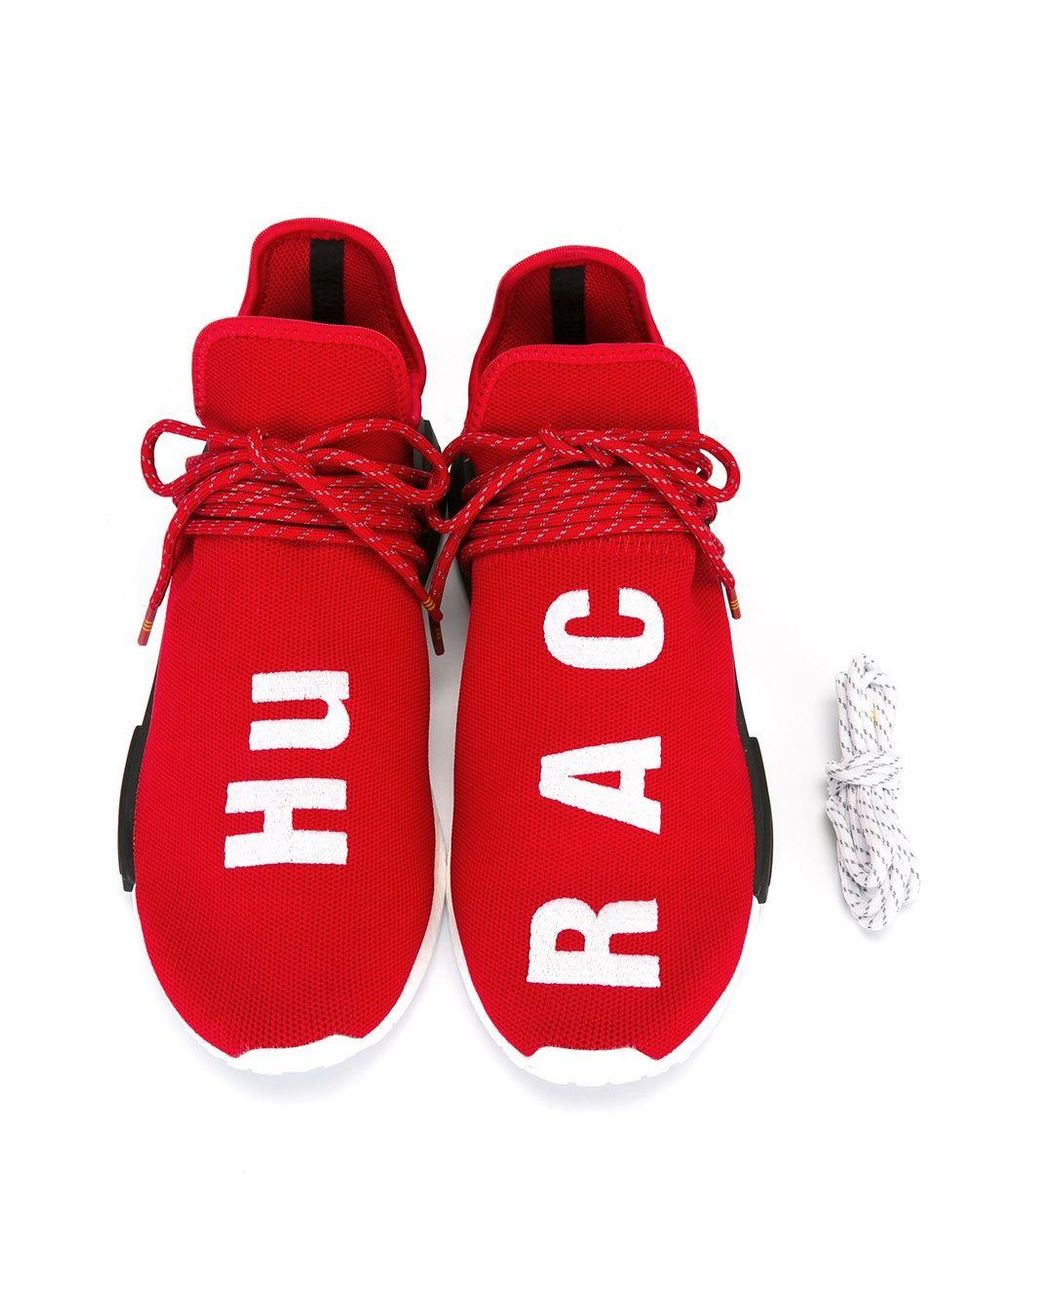 adidas Rubber Pharrell X Hu Nmd Red Human Race Sneakers for Men - Save 41%  | Lyst